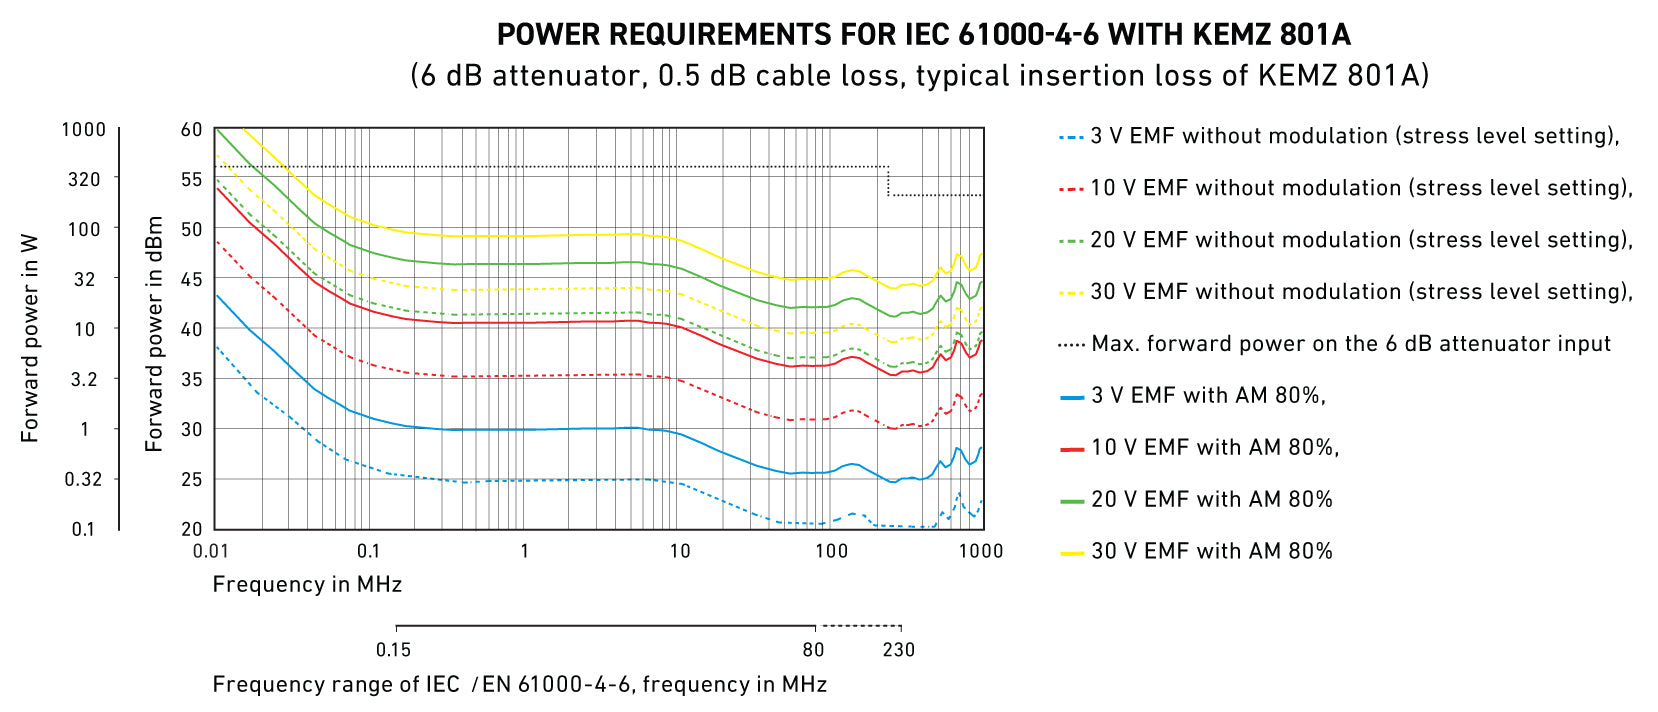 Power levels for IEC 61000-4-6 with the Teseq KEMZ